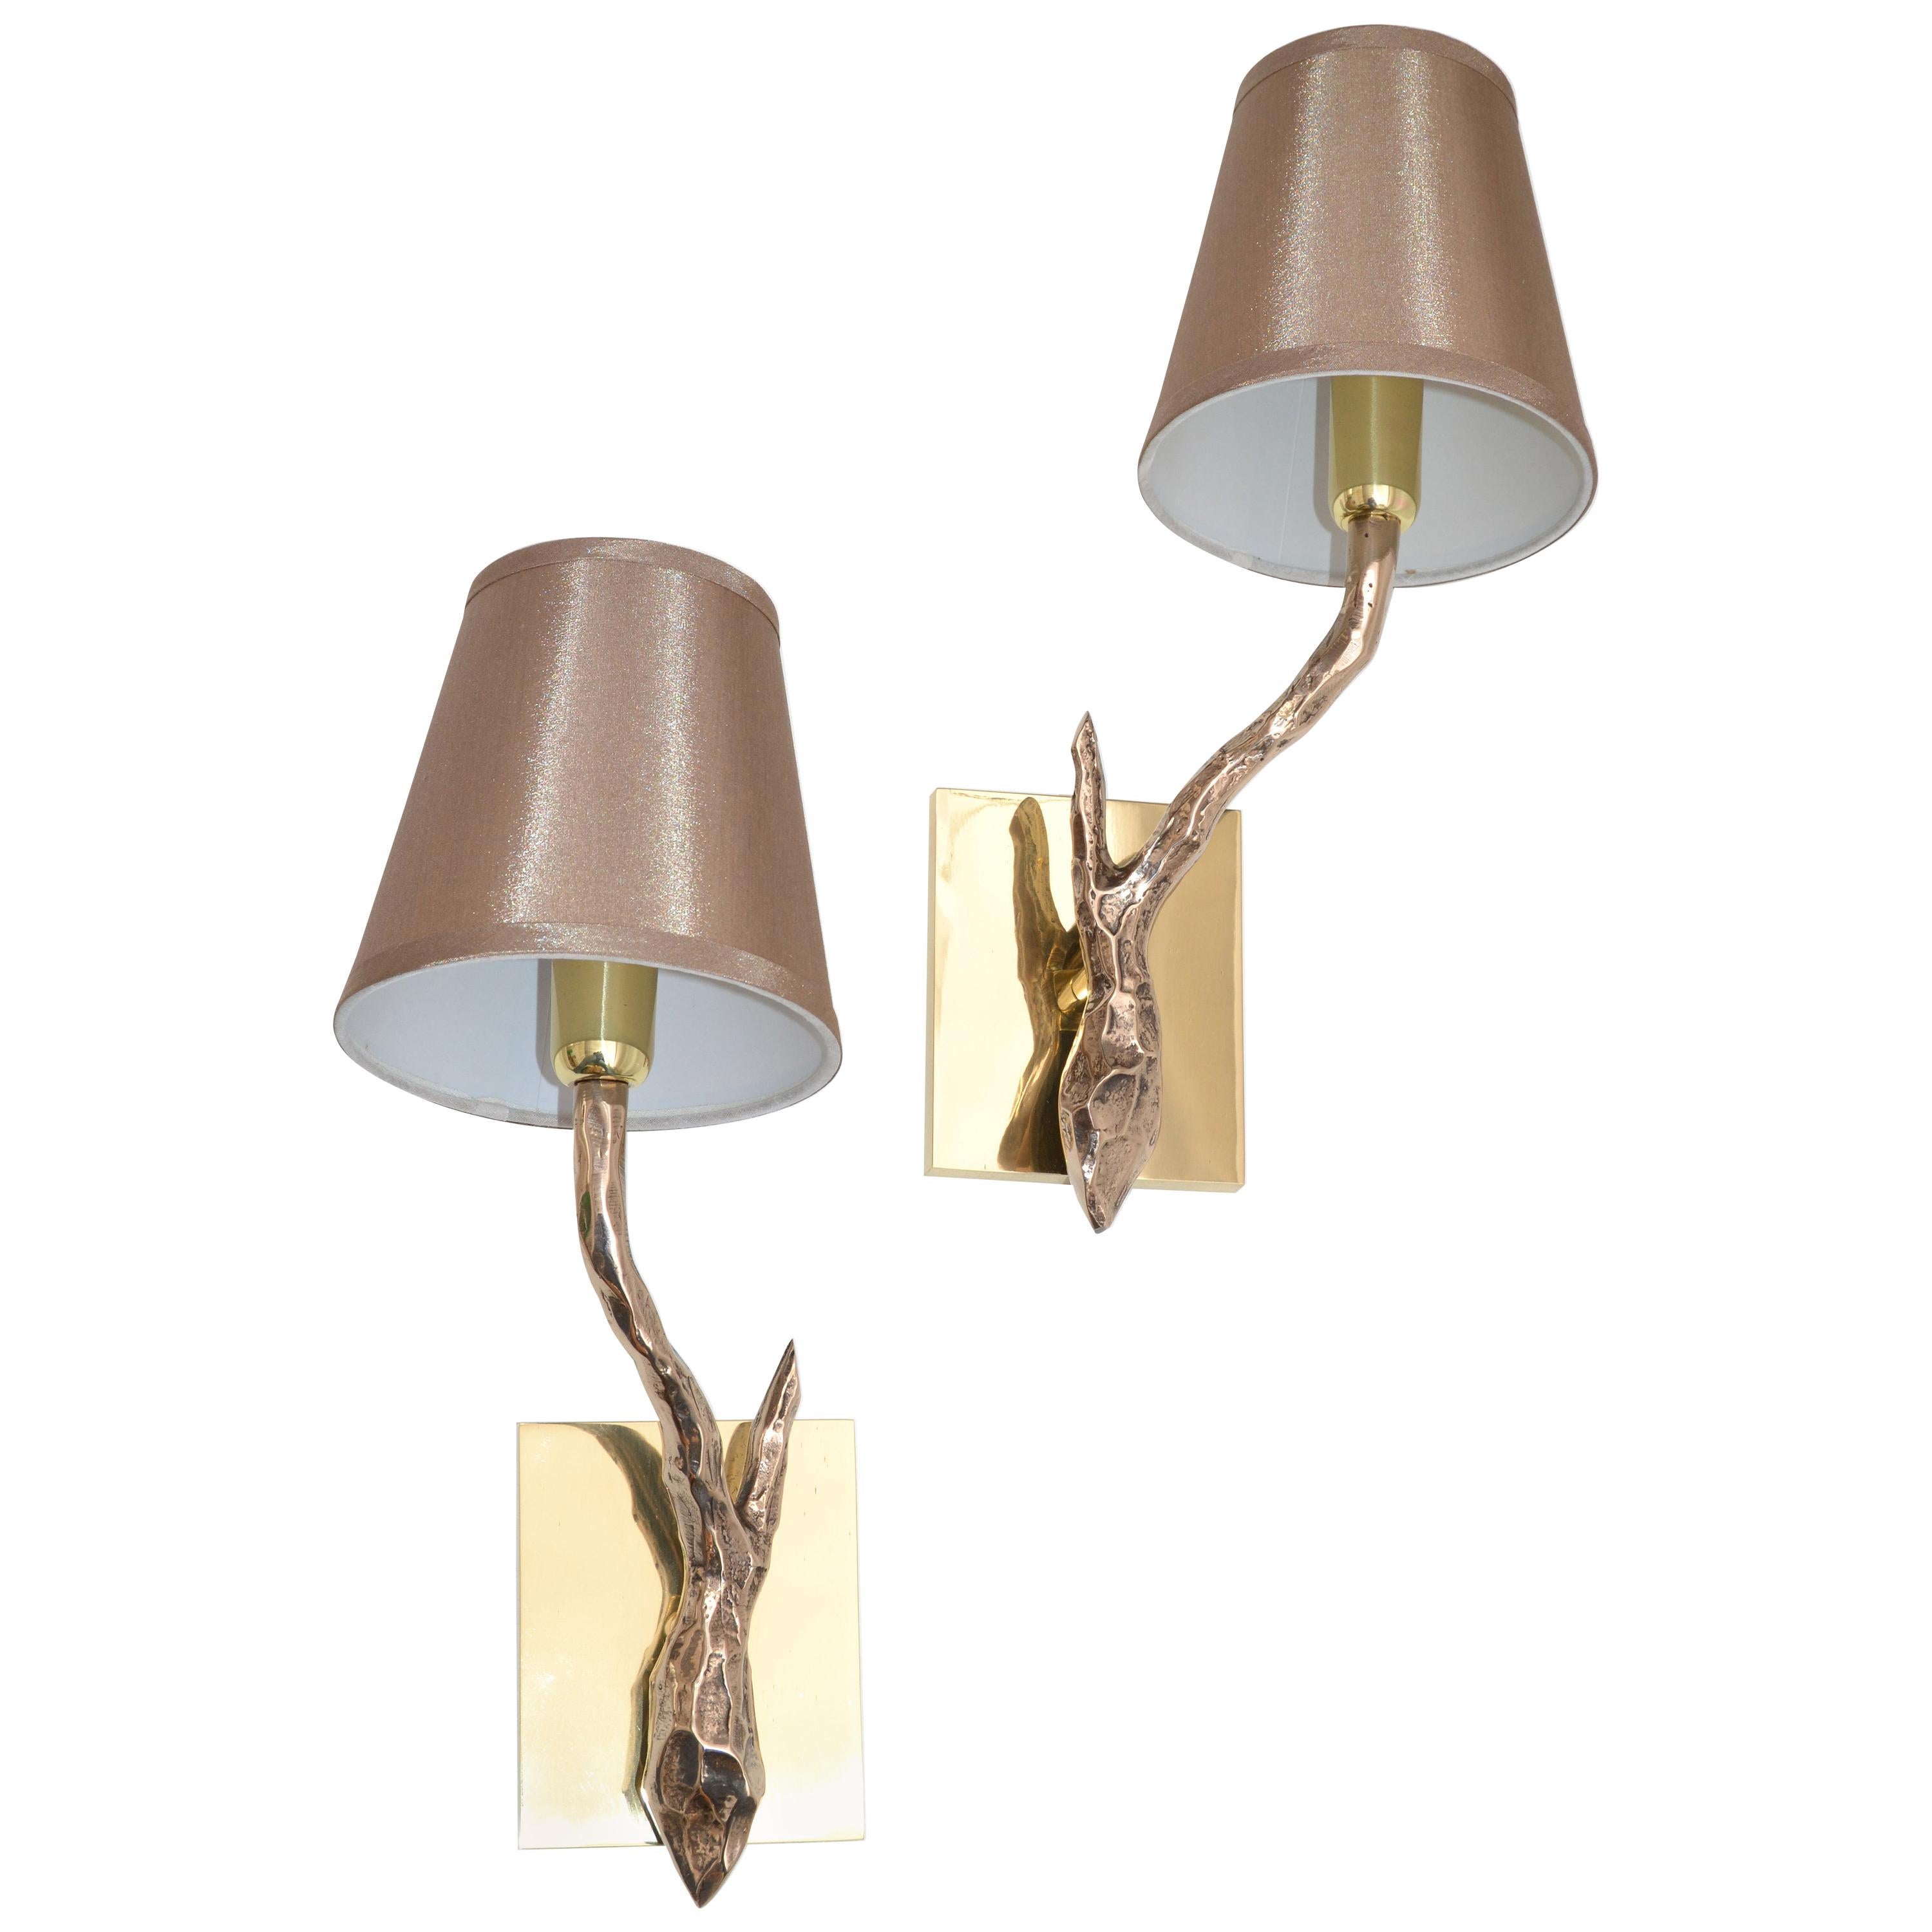 Pair of Agostini Style Sconces Bronze with Gold Metallic Shades, France, 1950s